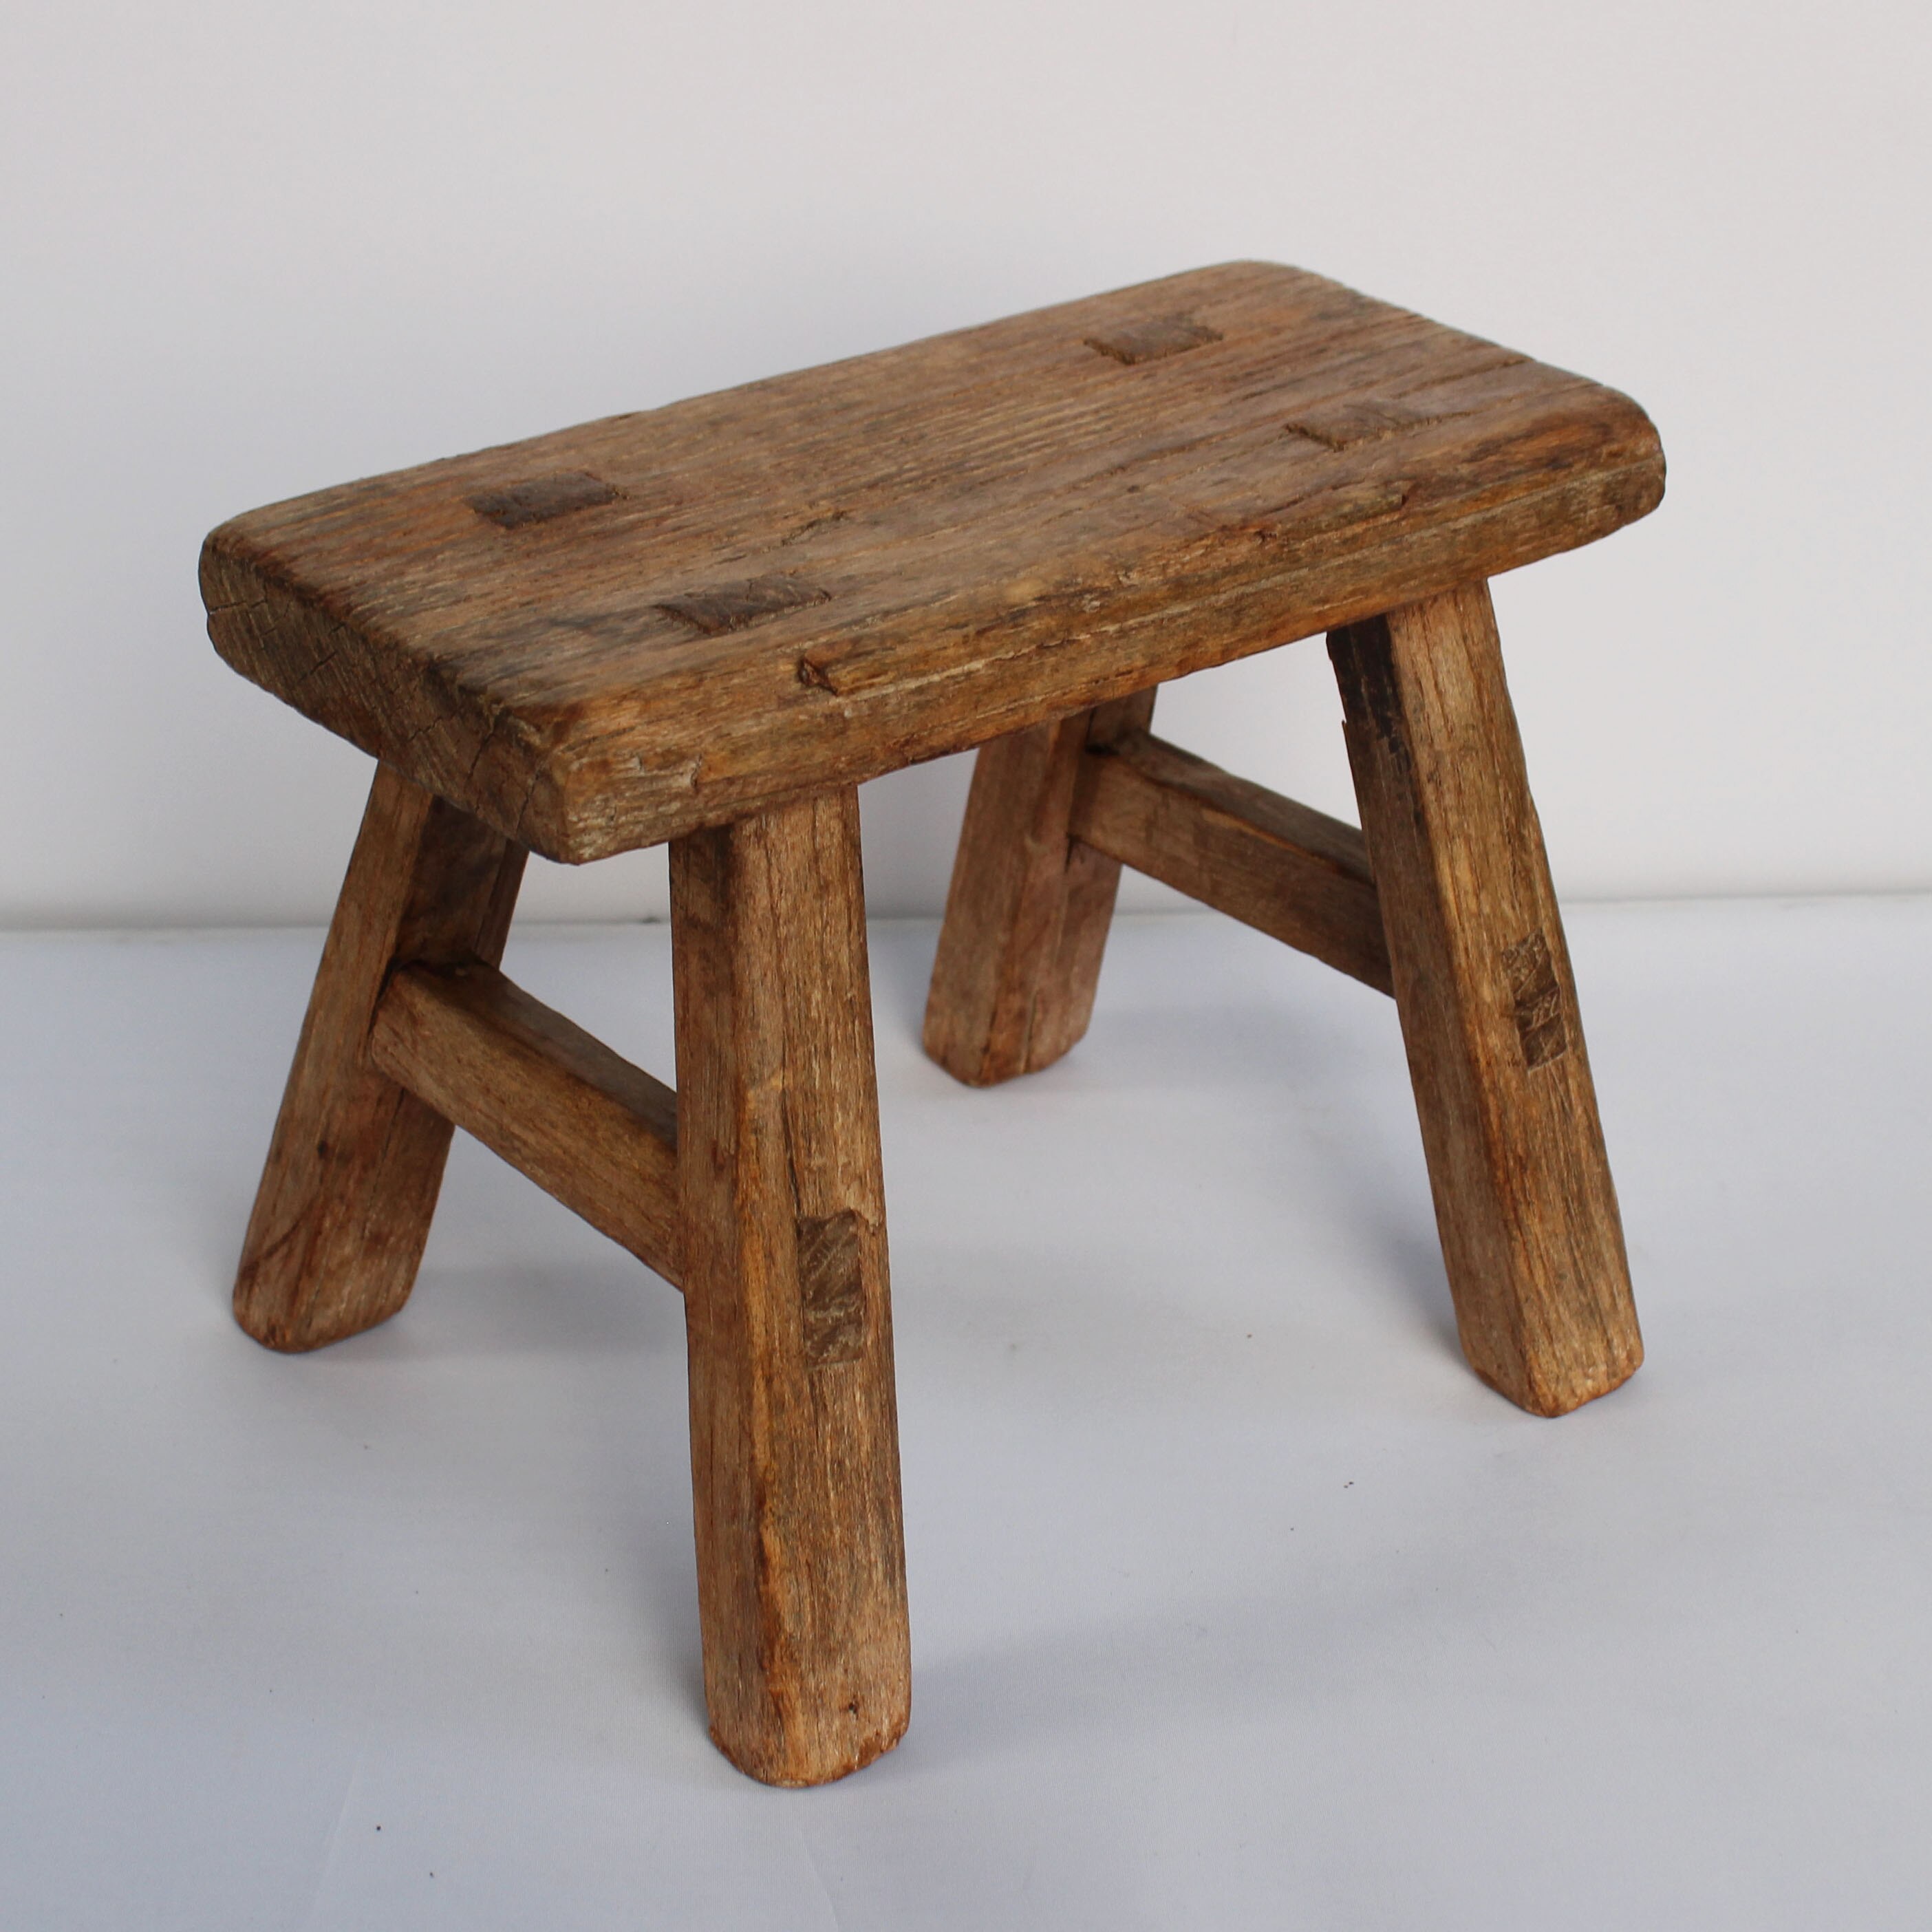 Small_Wooden_Stool